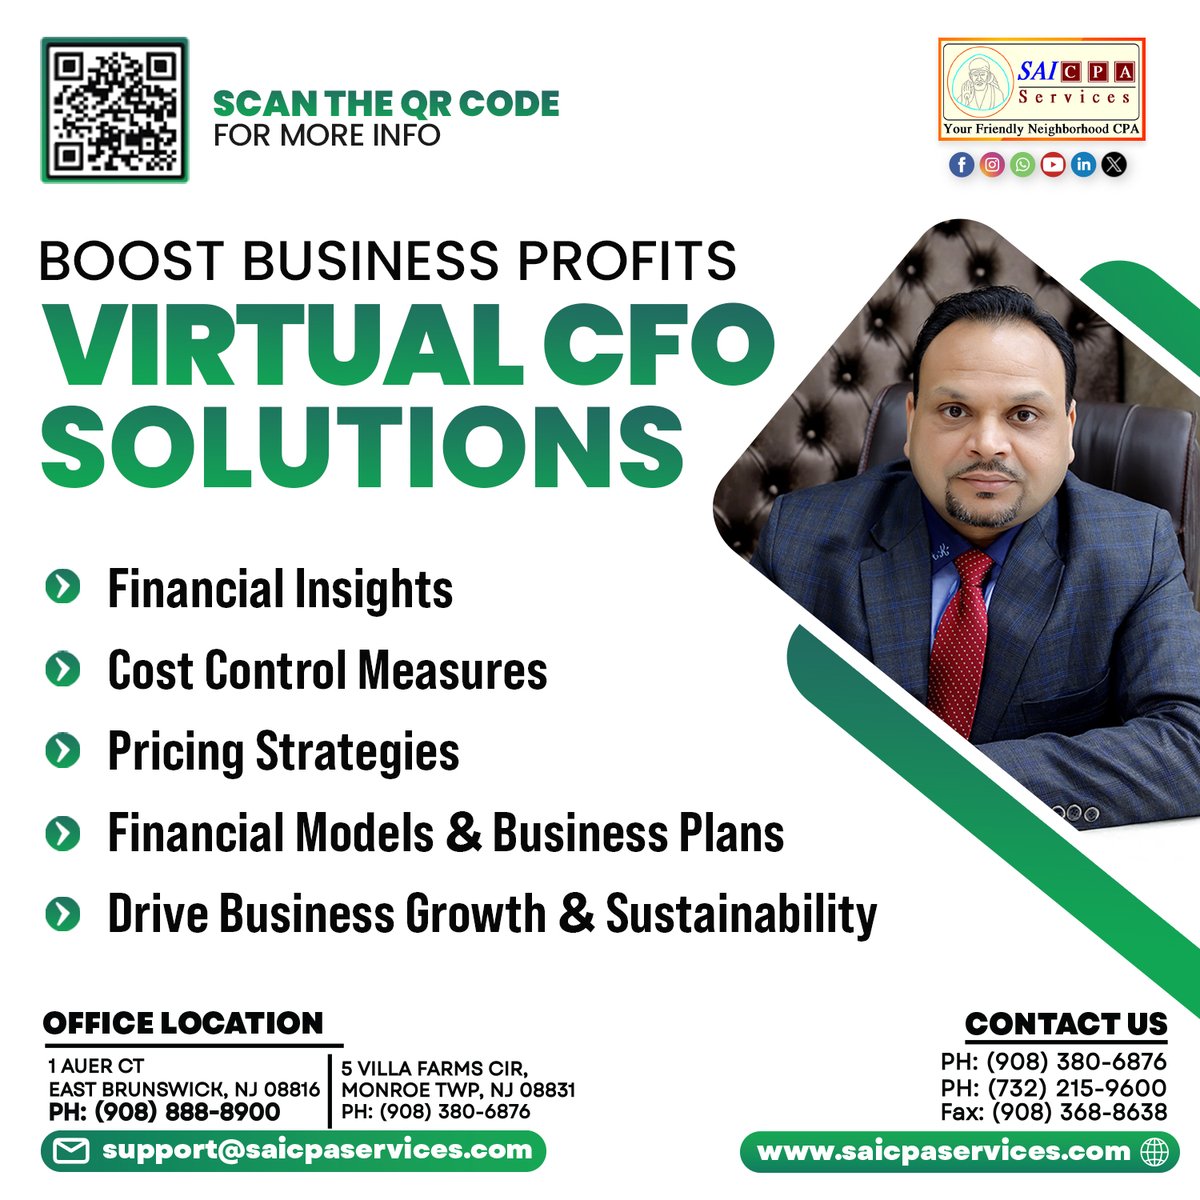 Boost business profits with our virtual CFO solutions
Contact Us: saicpaservices.com
(908) 380-6876
#BoostProfits #VirtualCFO #FinancialInsights #BusinessGrowth #CostControl #PricingStrategies #CPAServices